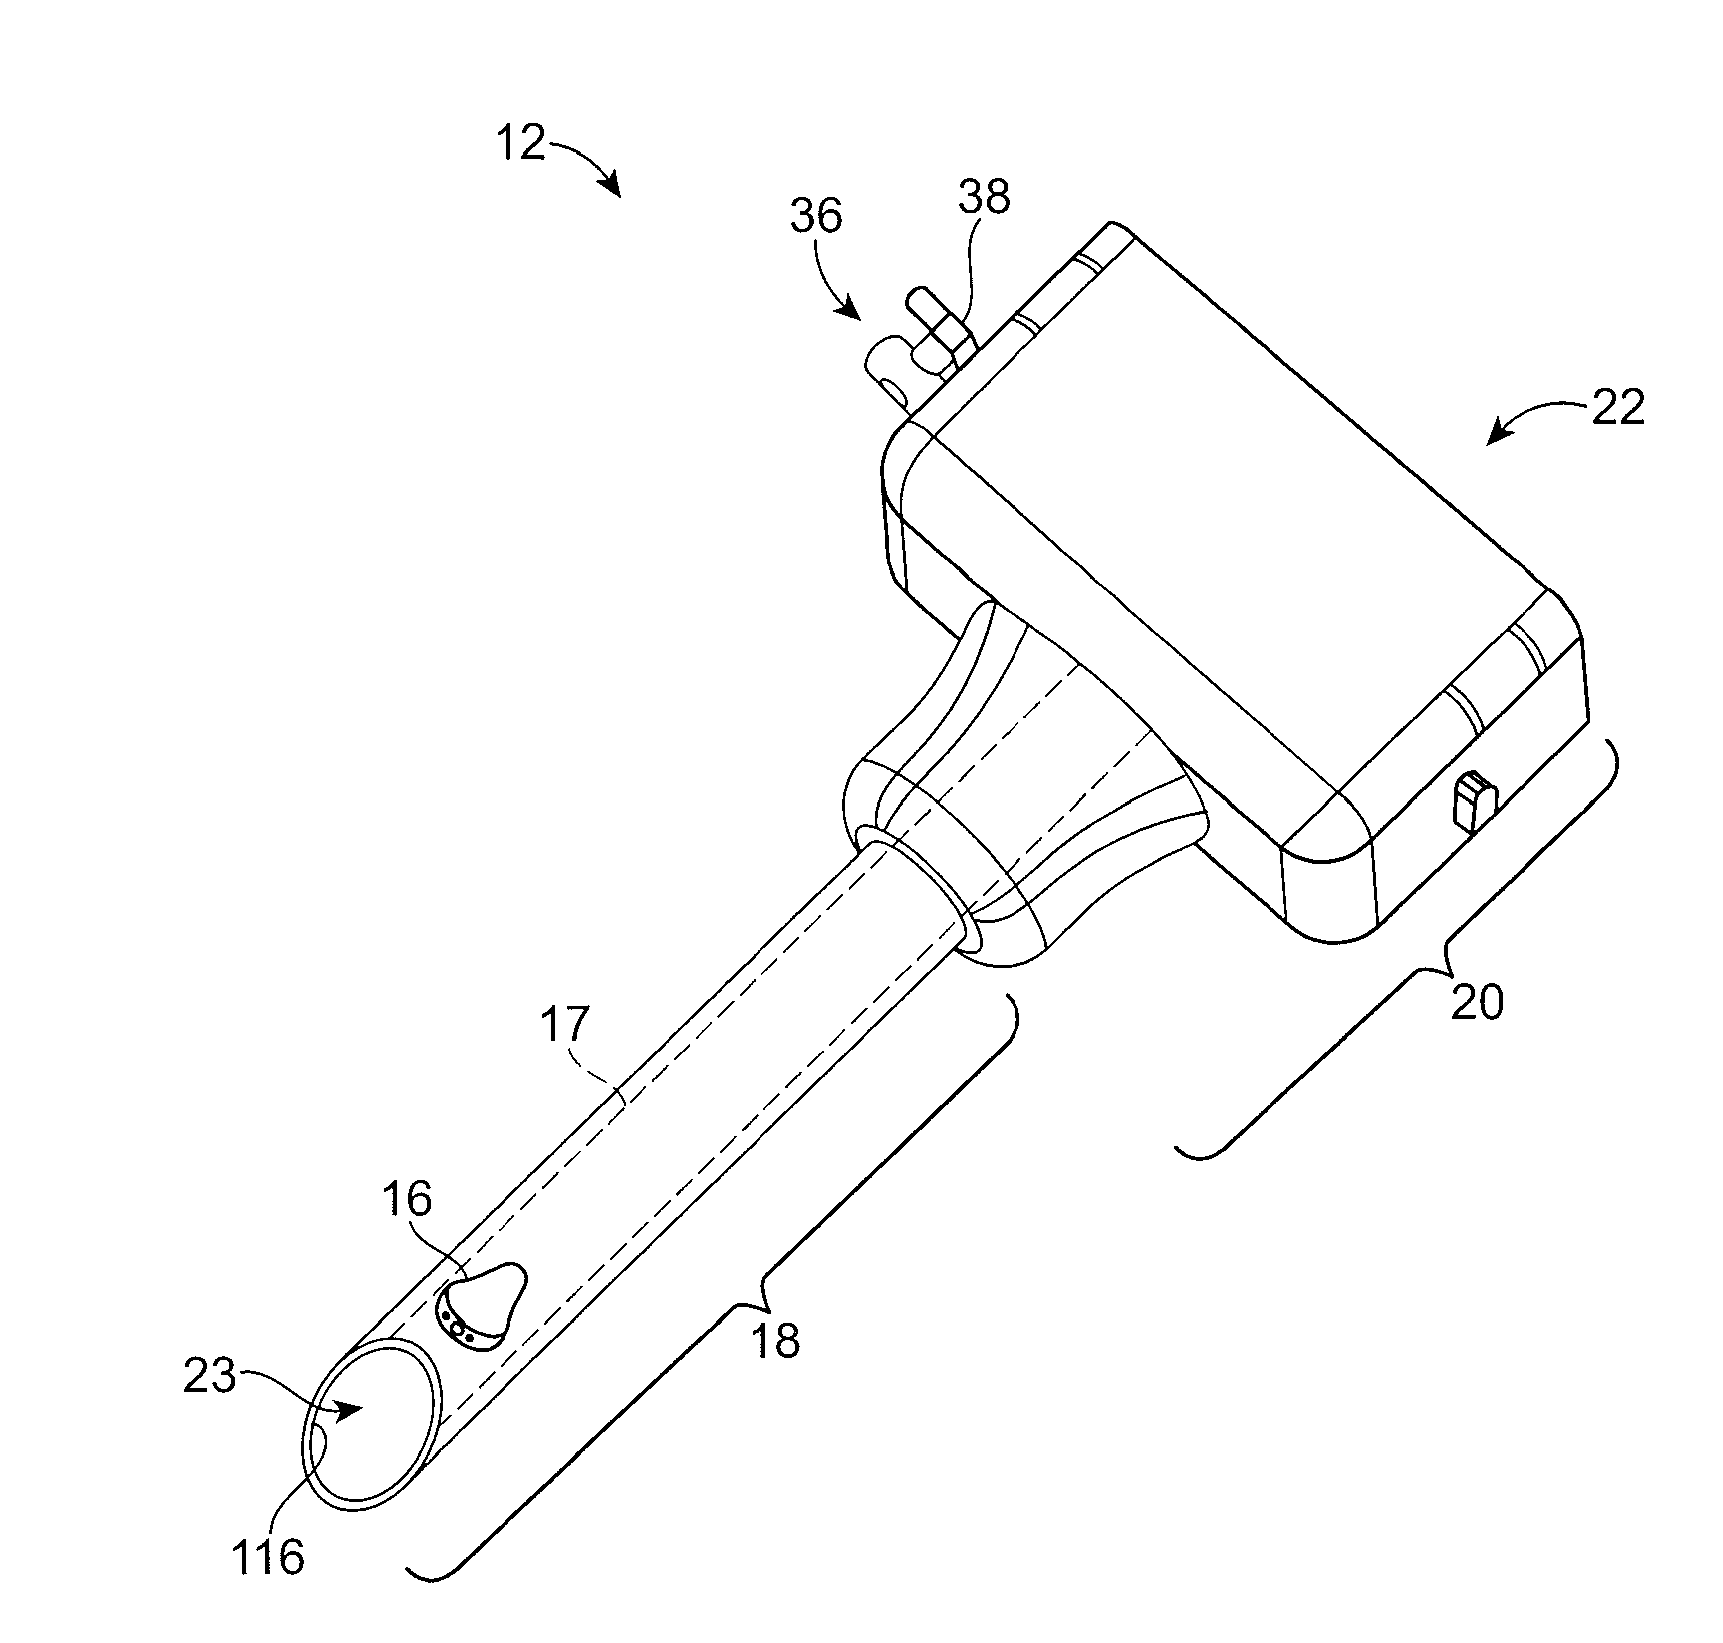 Surgical access port with embedded imaging device